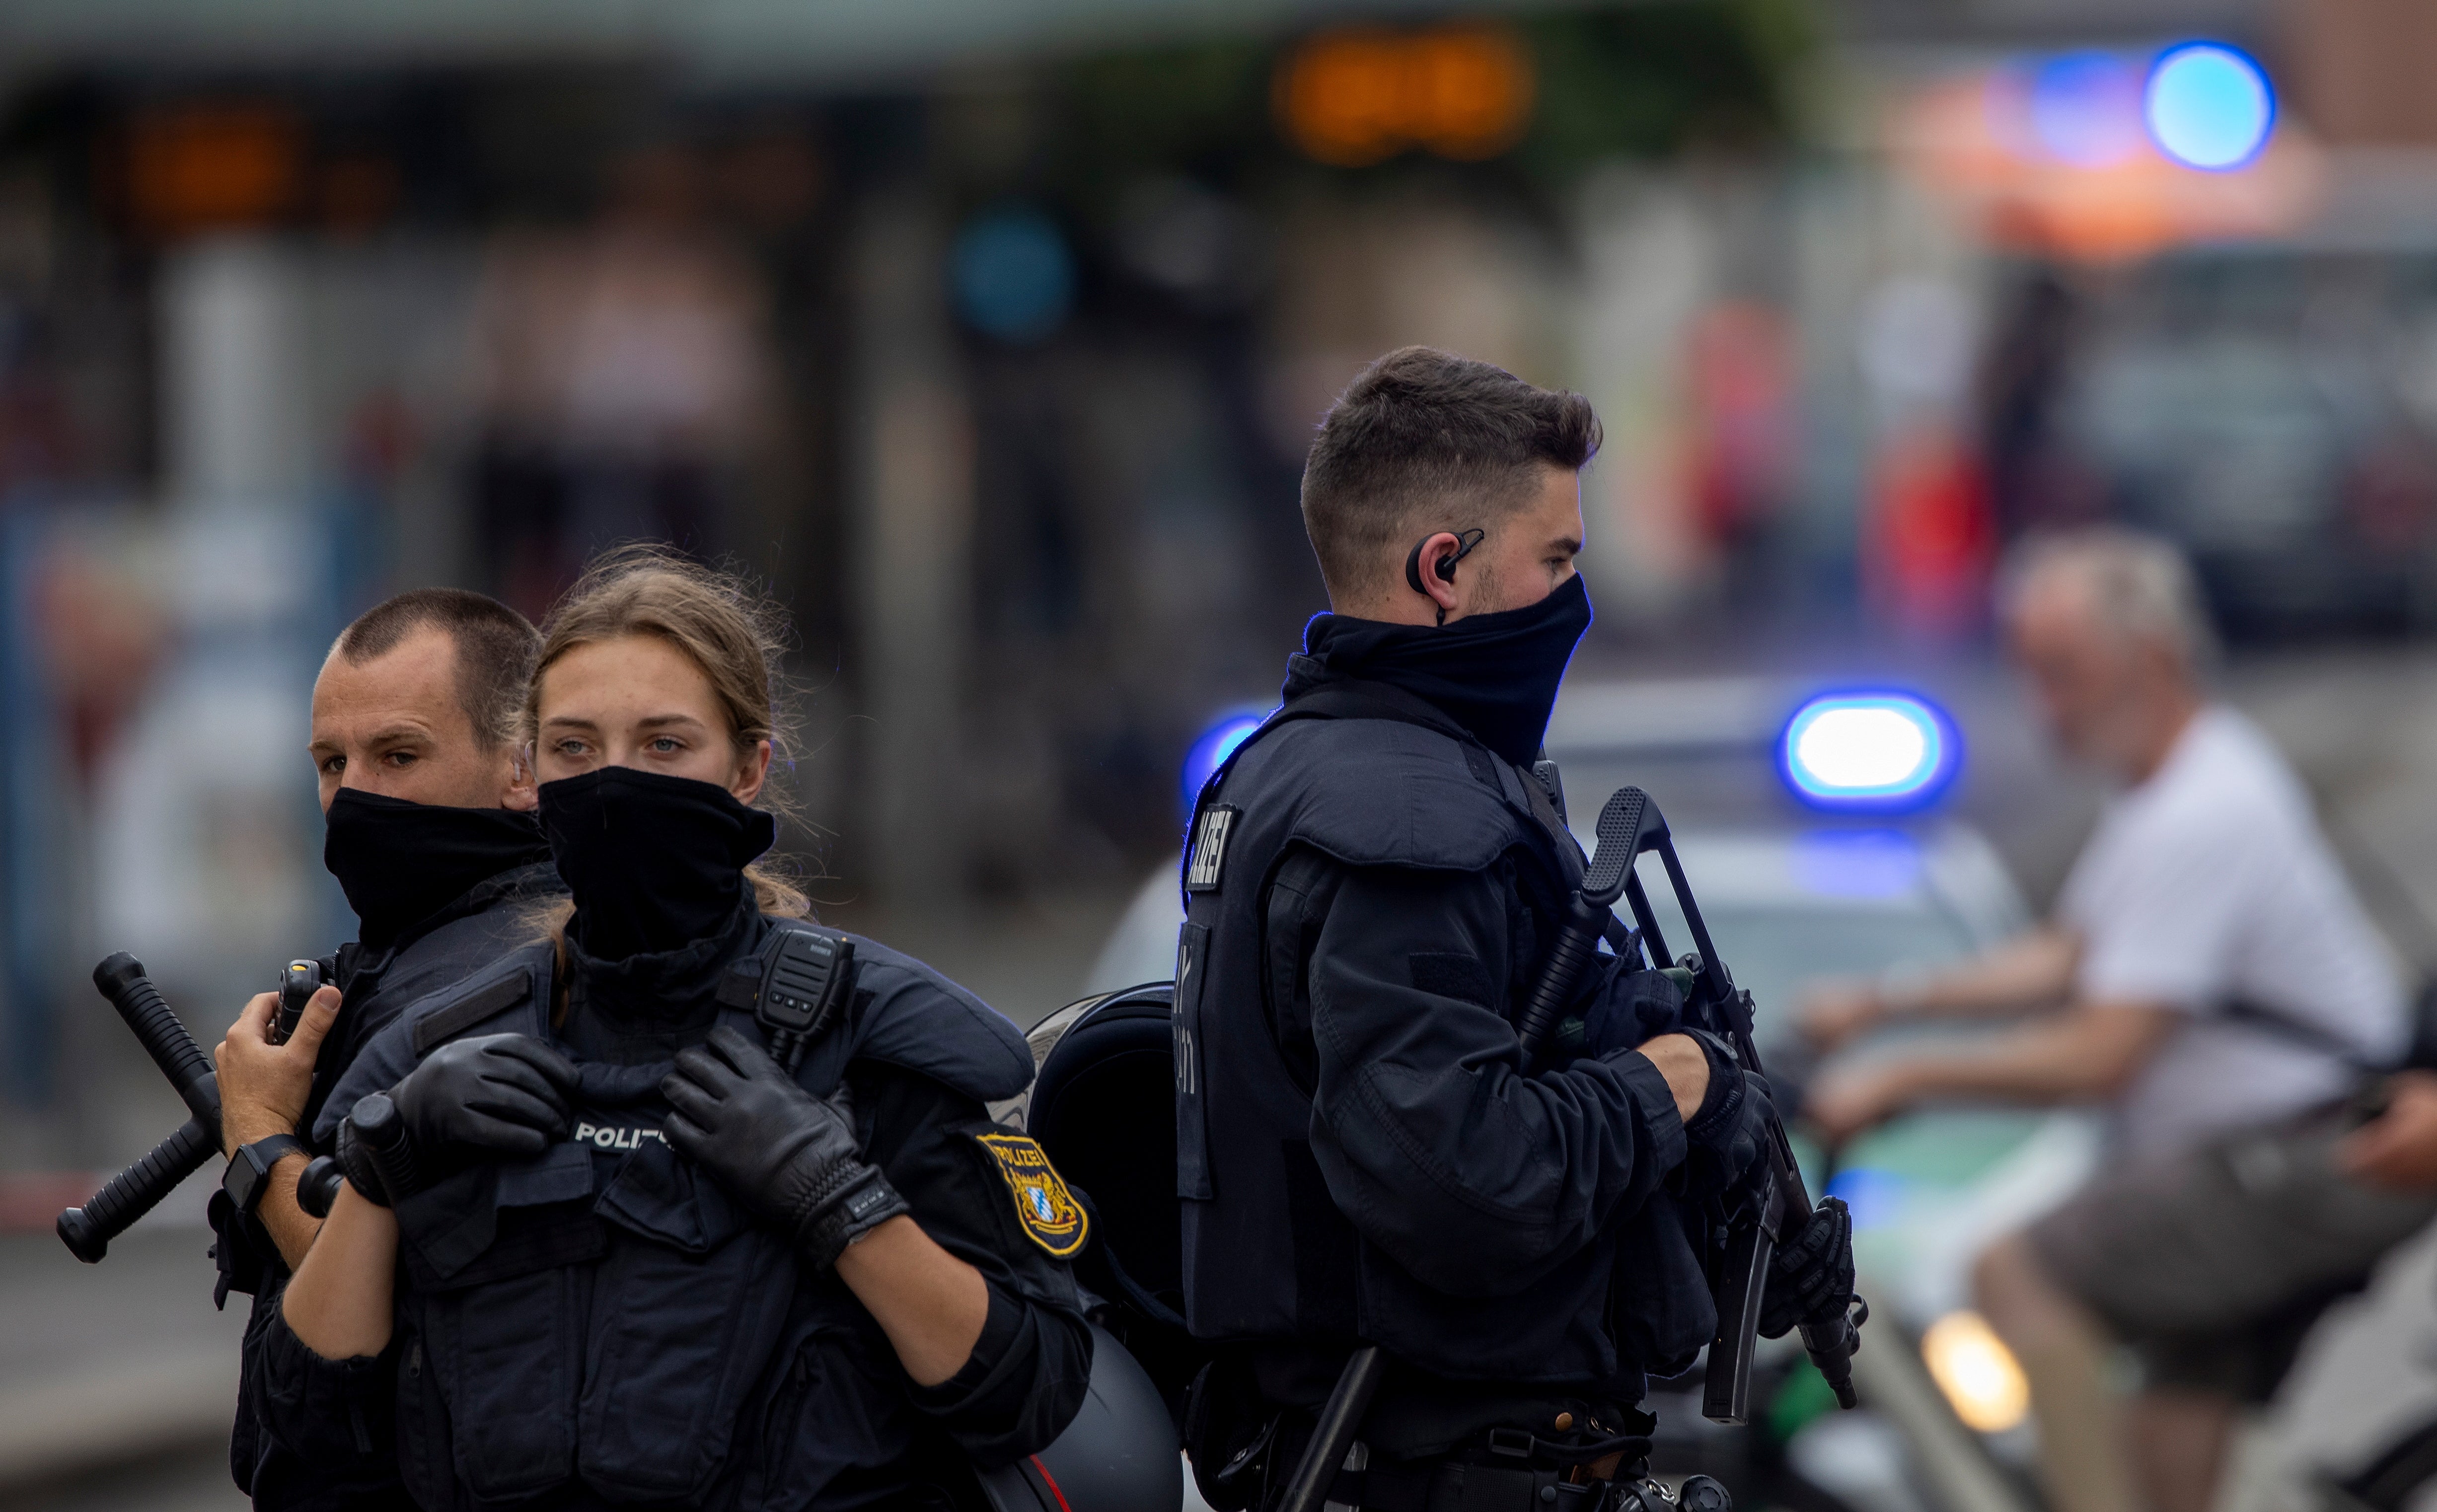 Police in Wuerzburg, Germany after three people were kiled in a stabbing attack